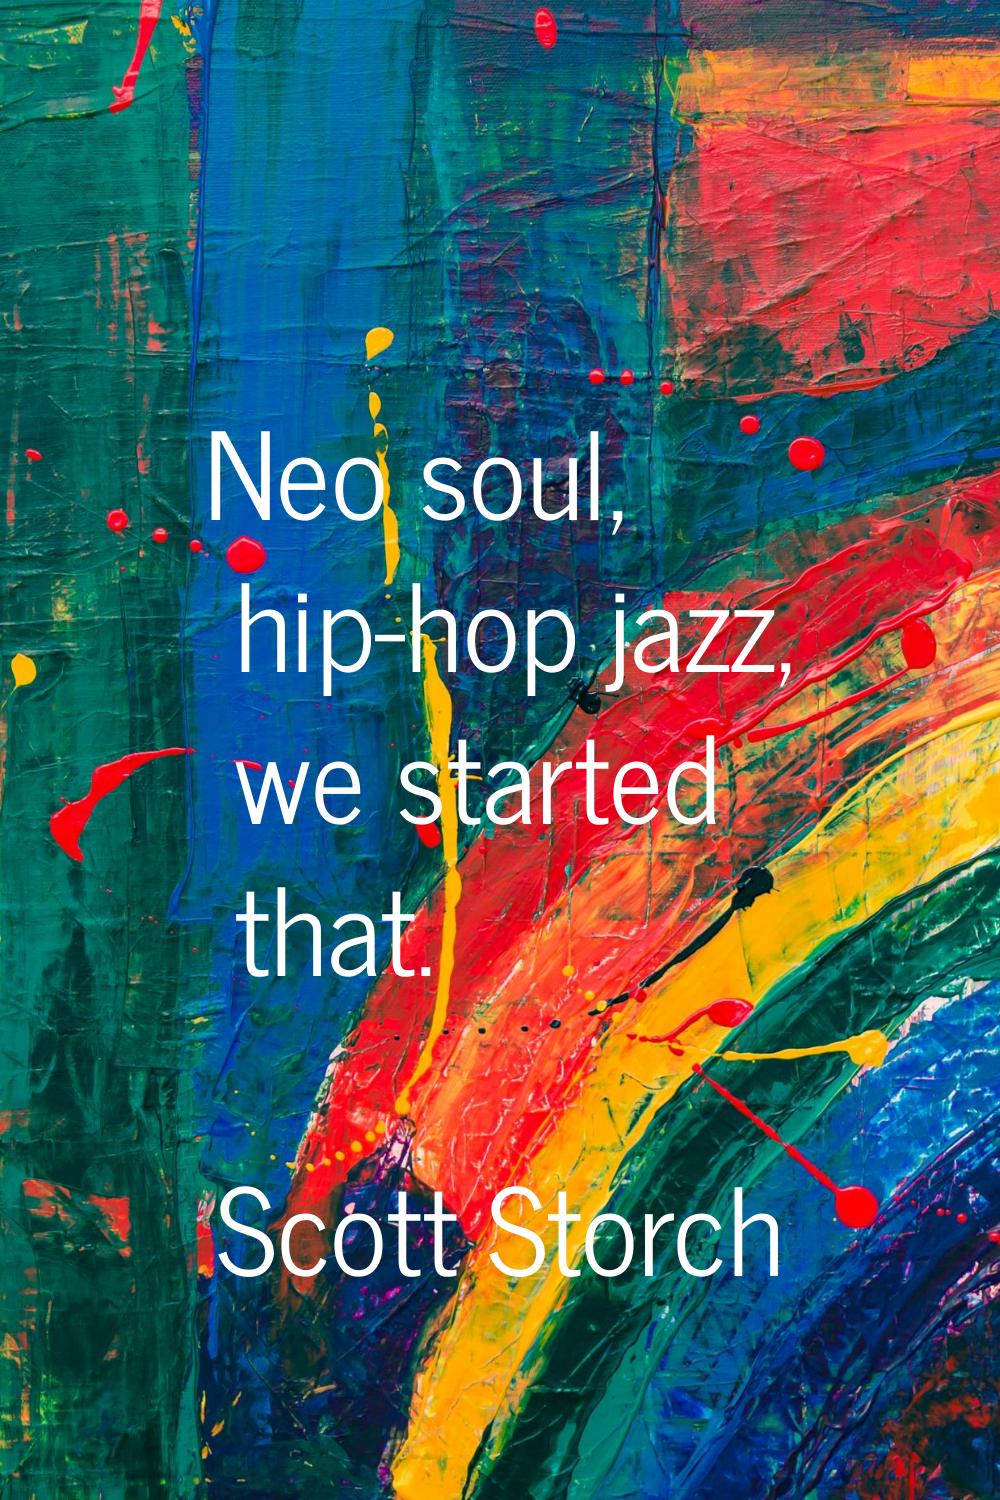 Neo soul, hip-hop jazz, we started that.